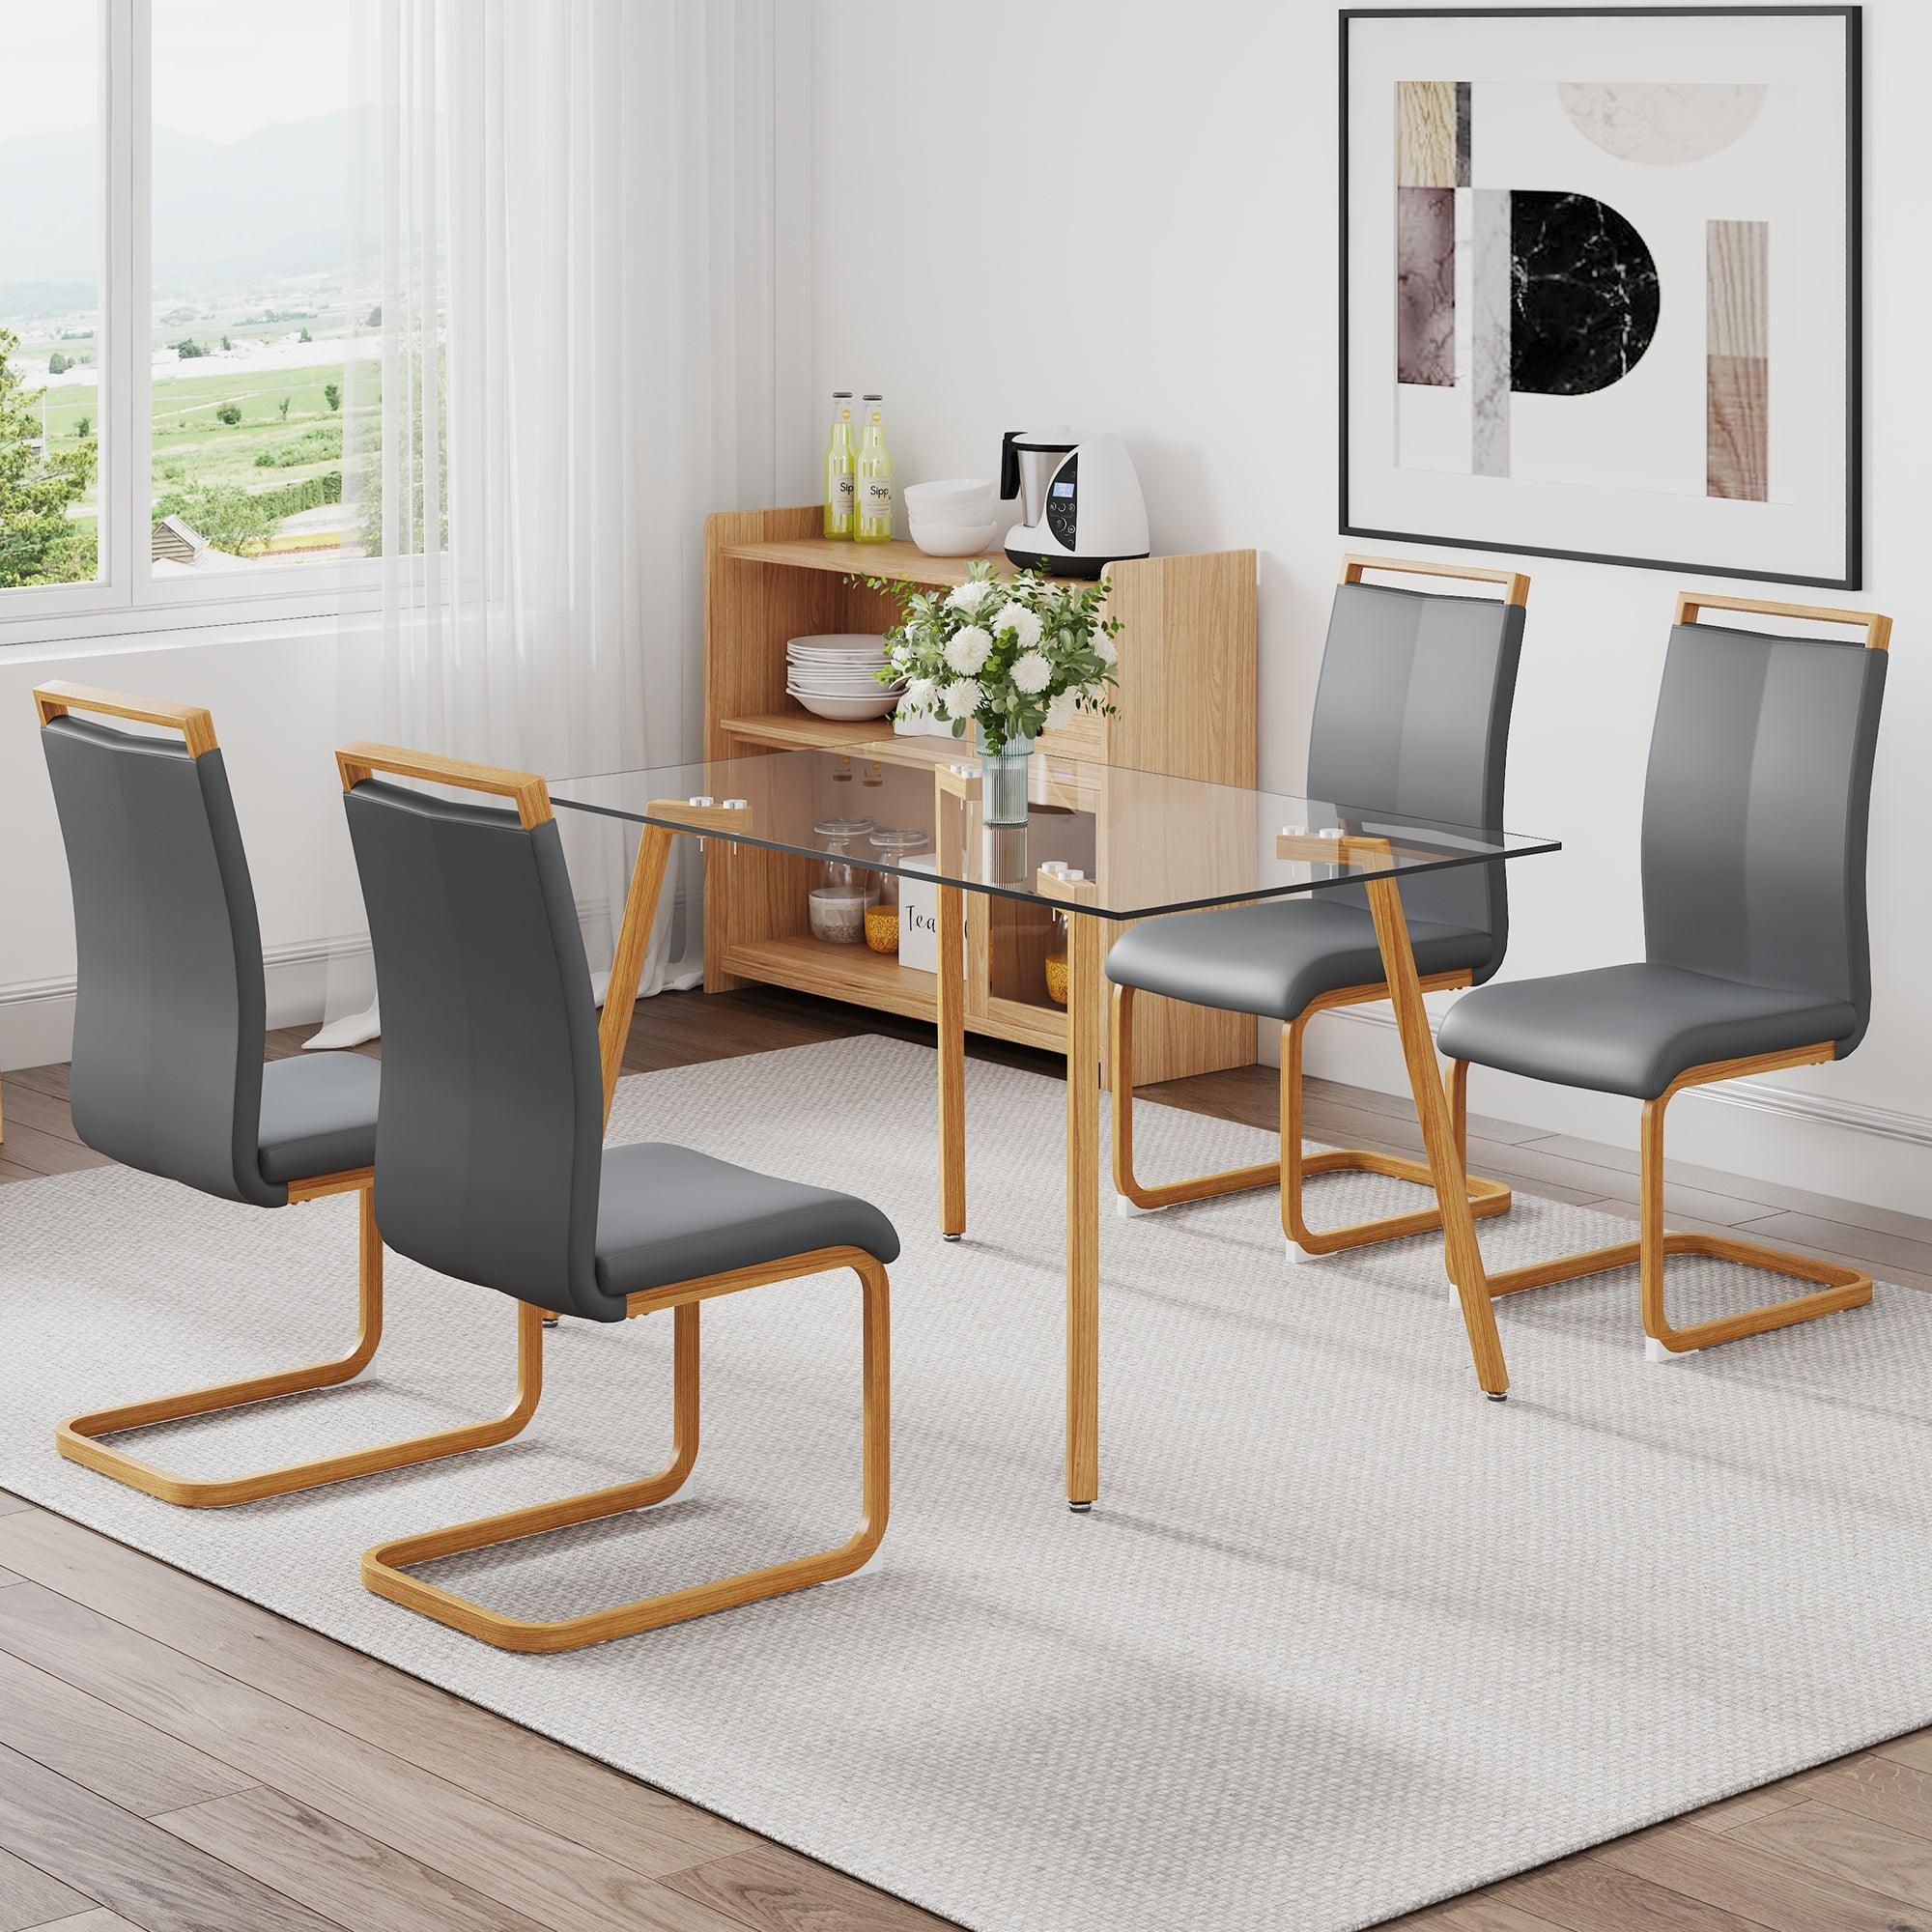 🆓🚛 Table & Chair Set, 1 Table & 4 Gray Chairs Glass Dining Table With 0.31" Tempered Glass Tabletop & Wood Color Metal Legs, Pu Leather High Back Upholstered Chair With Wood Color Metal Leg